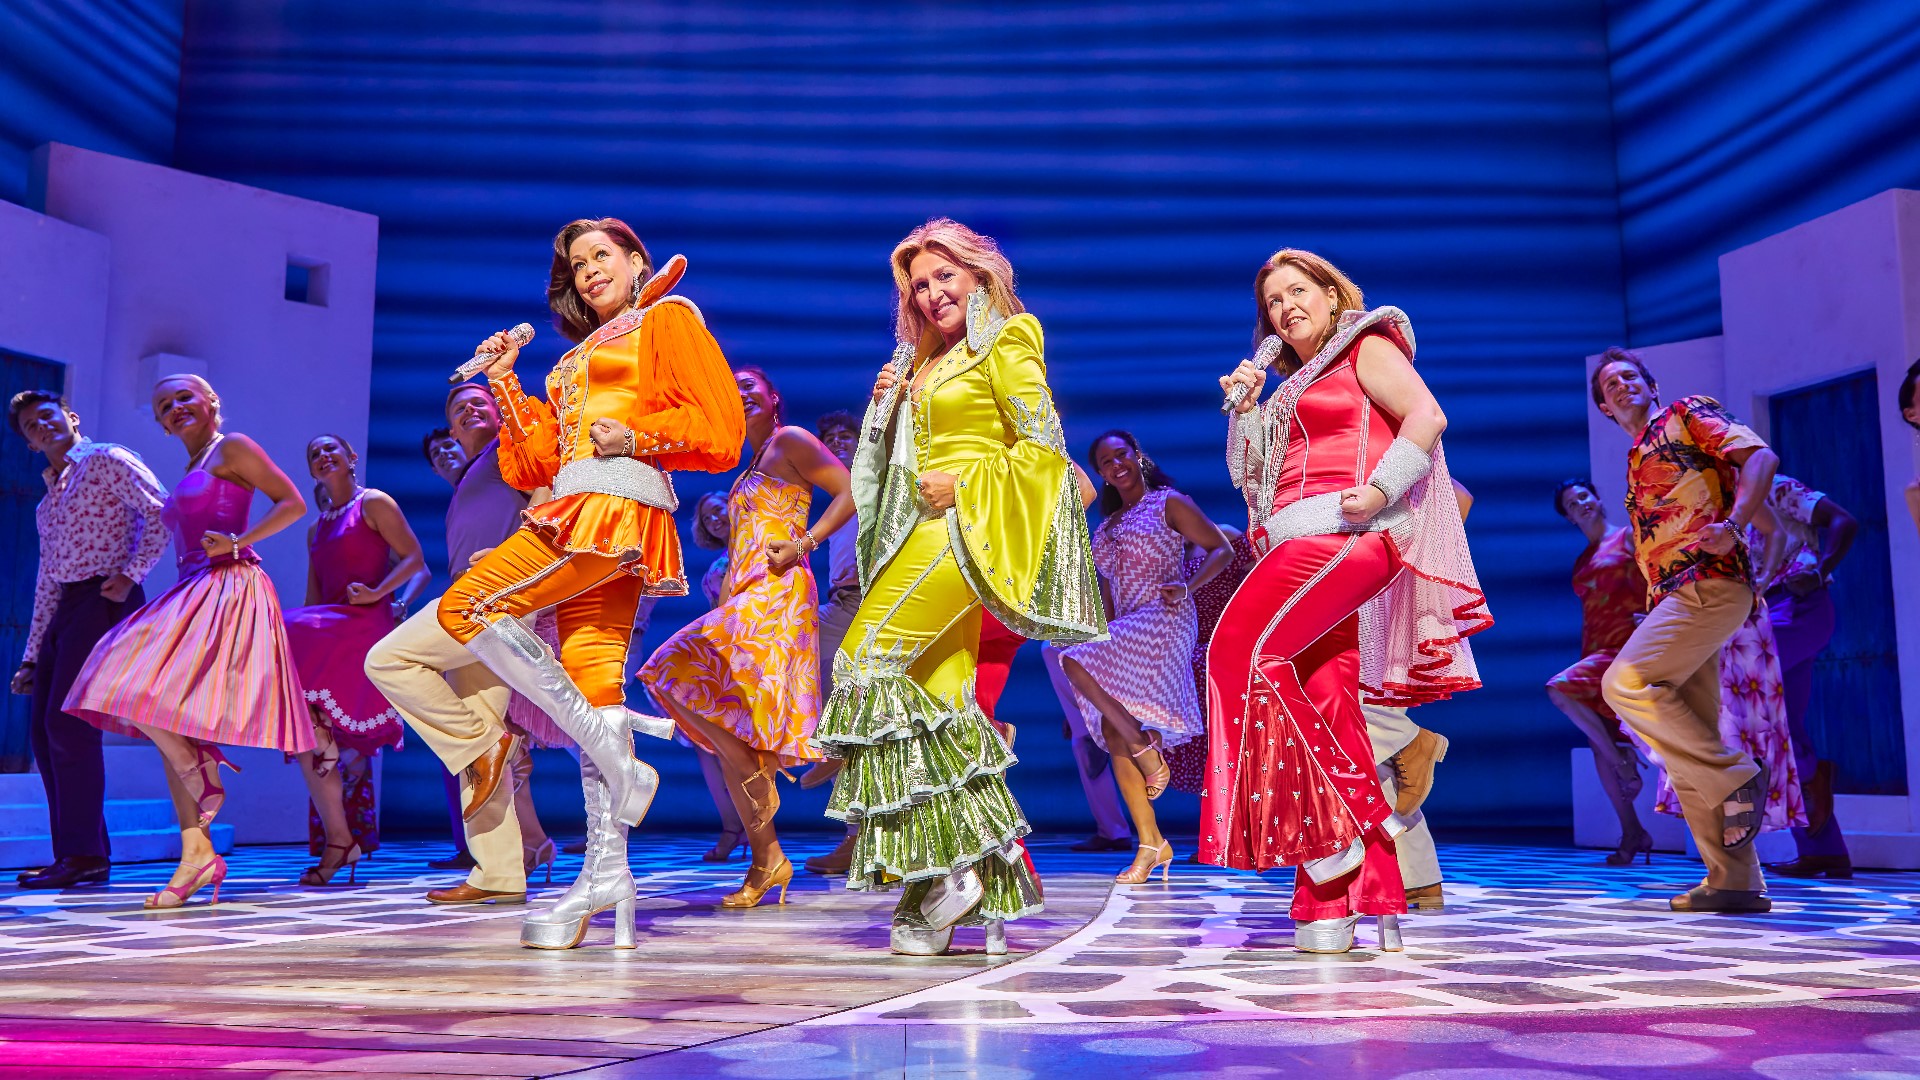 Actor Grant Reynolds talks about the tour for the 25h anniversary of the debut of Mamma Mia! premiering at Denver Center for the Performing Arts.